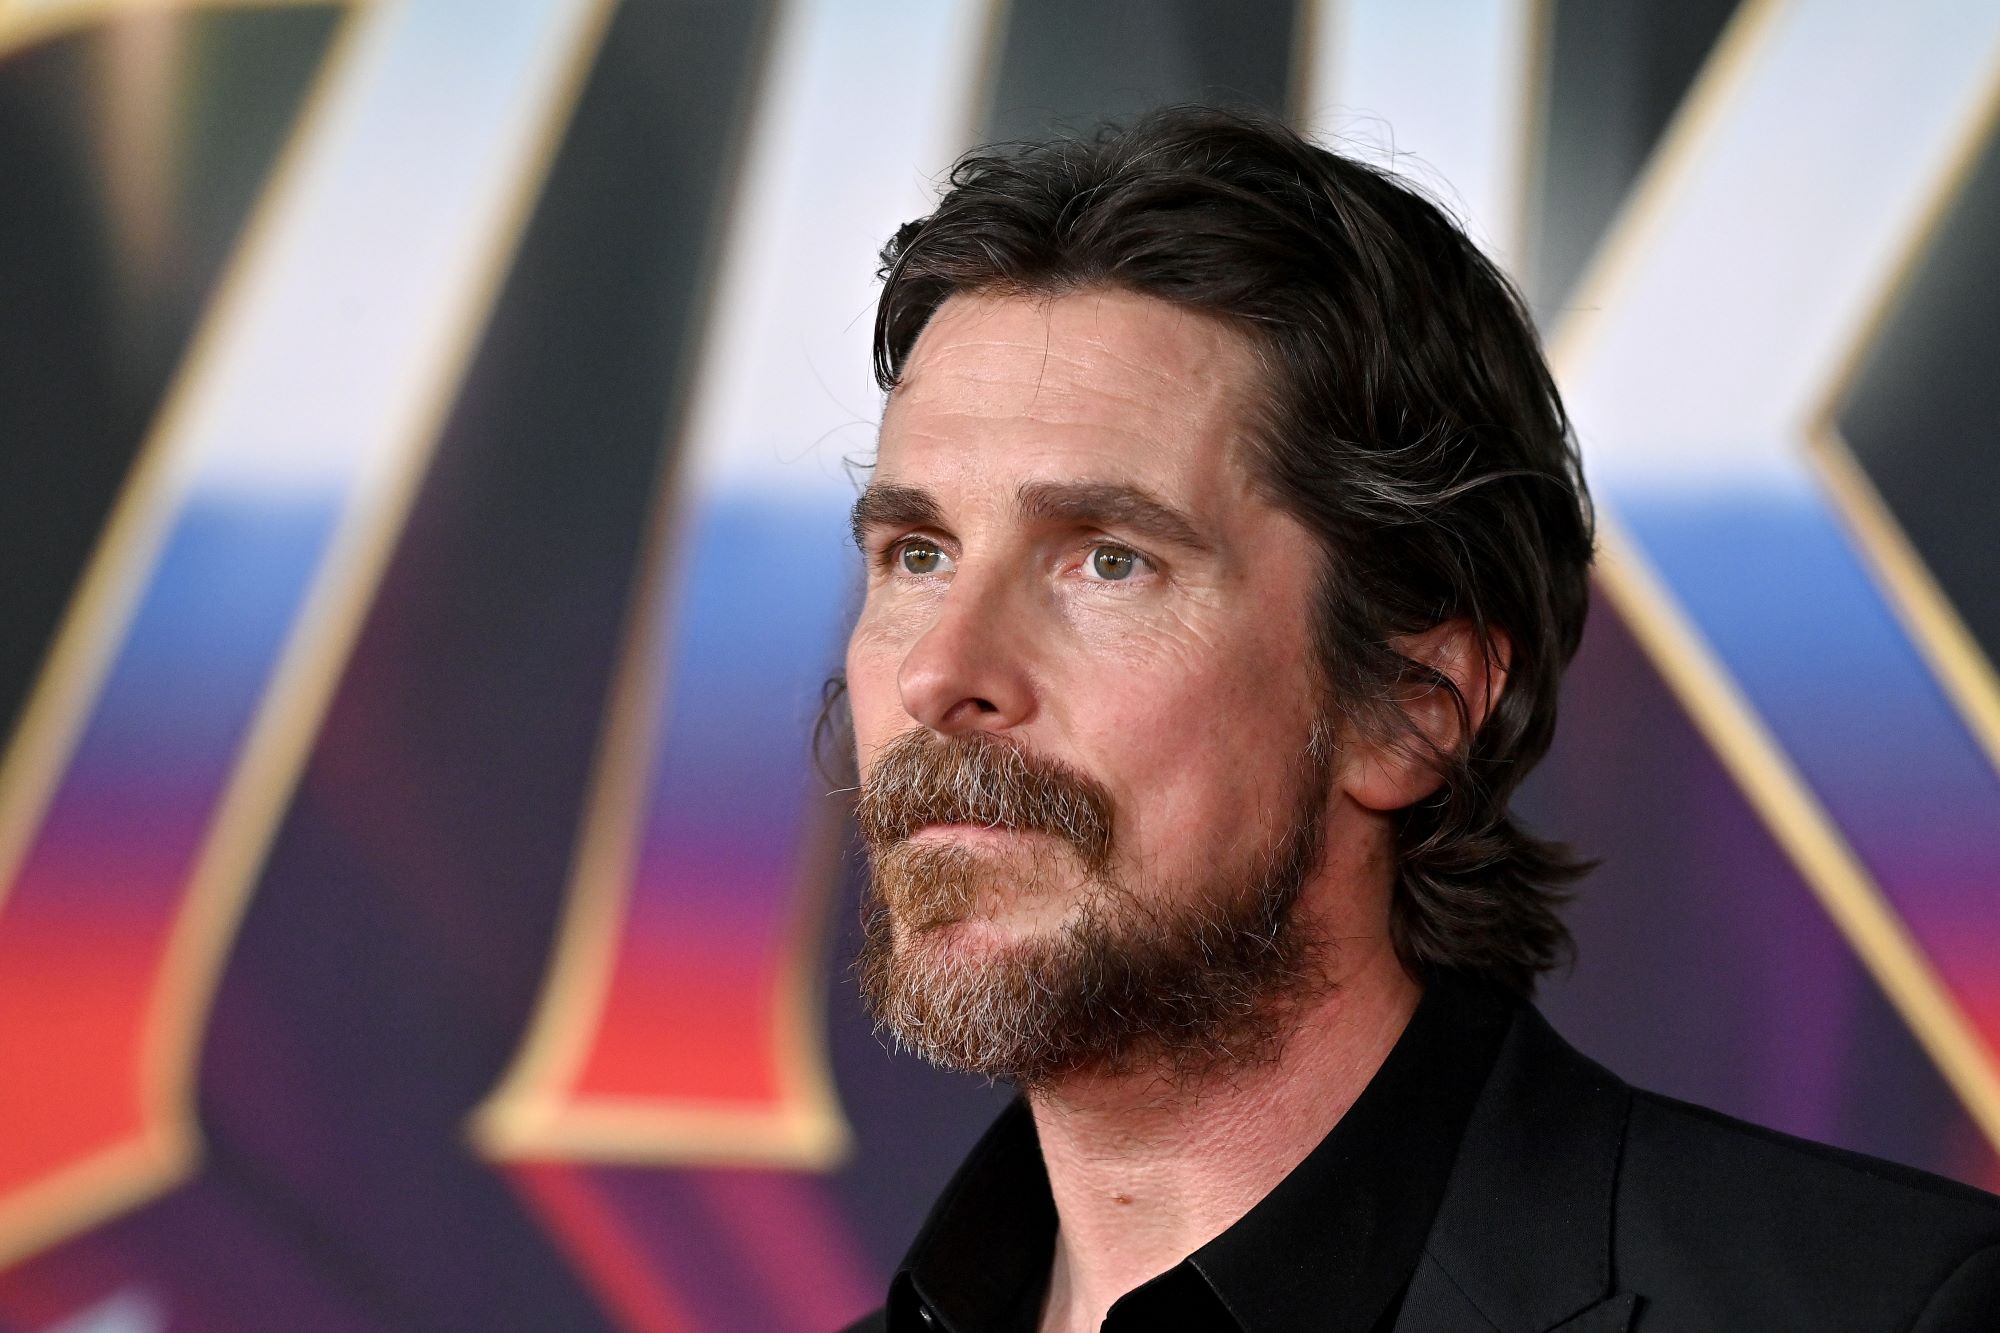 Christian Bale, who played Gorr the God Butcher in 'Thor: Love and Thunder,' wears a black suit over a black button-up shirt.